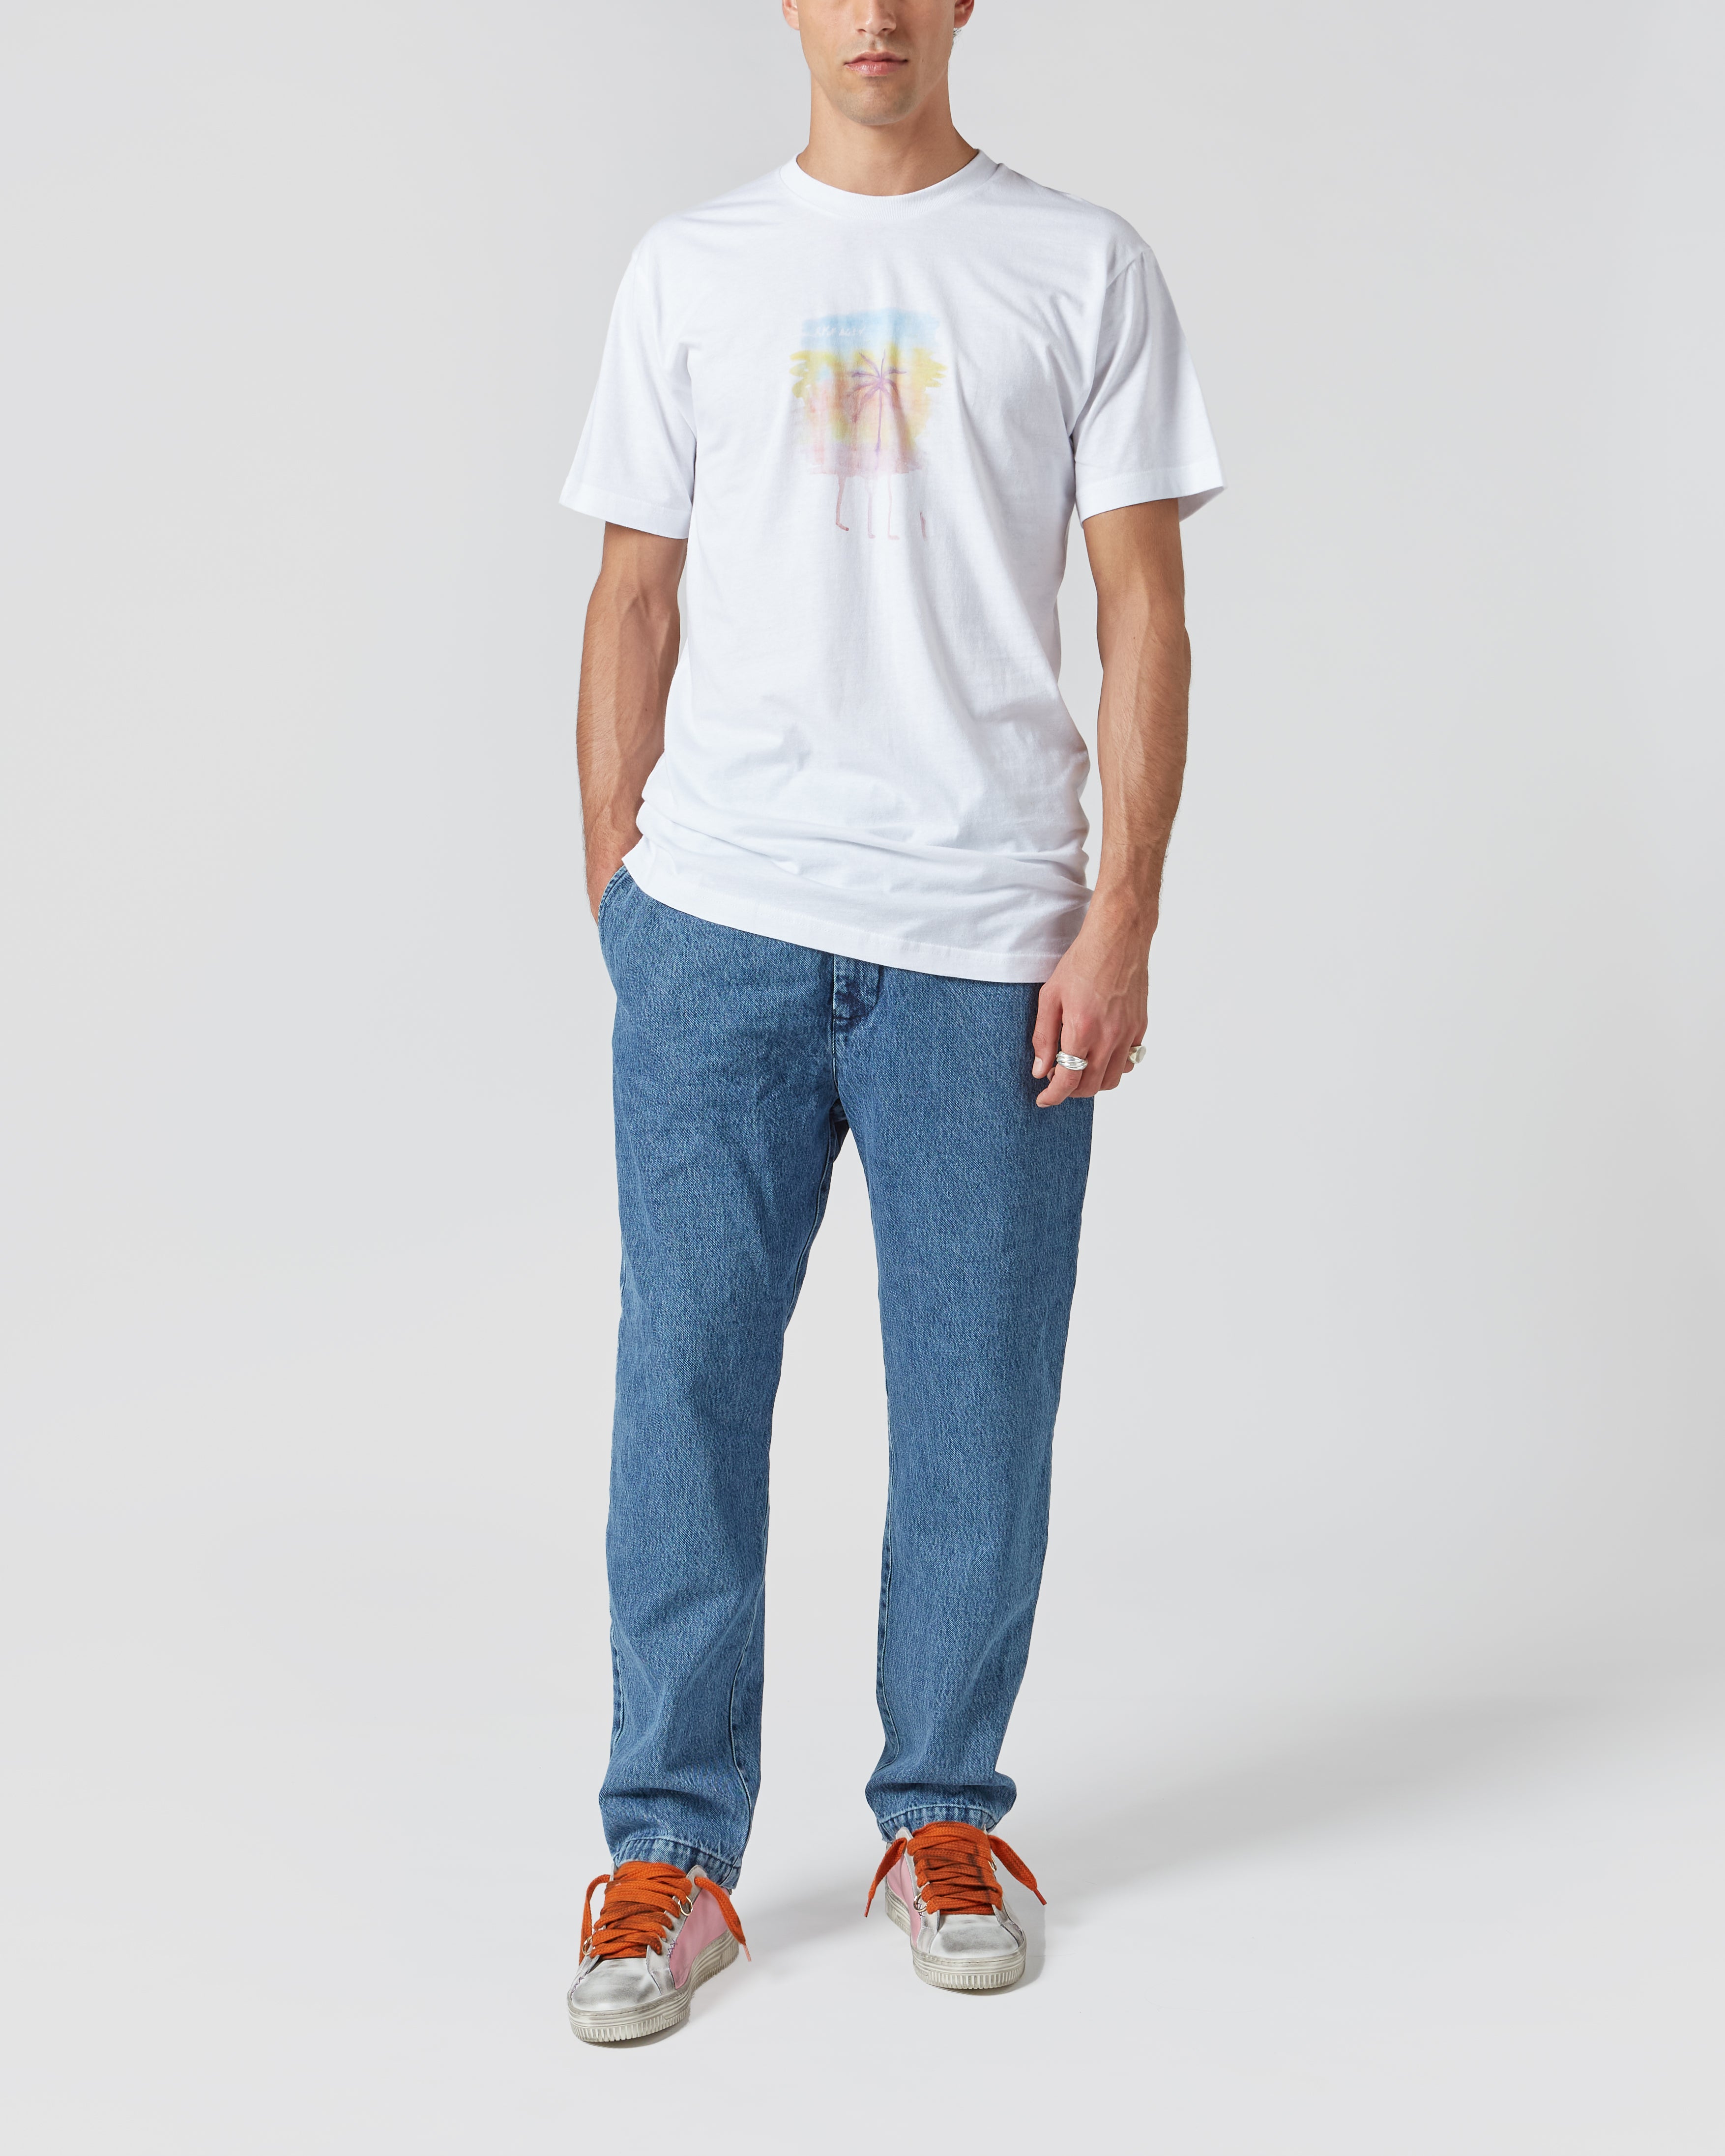 The Company T-SHIRT IN WHITE | of Curated